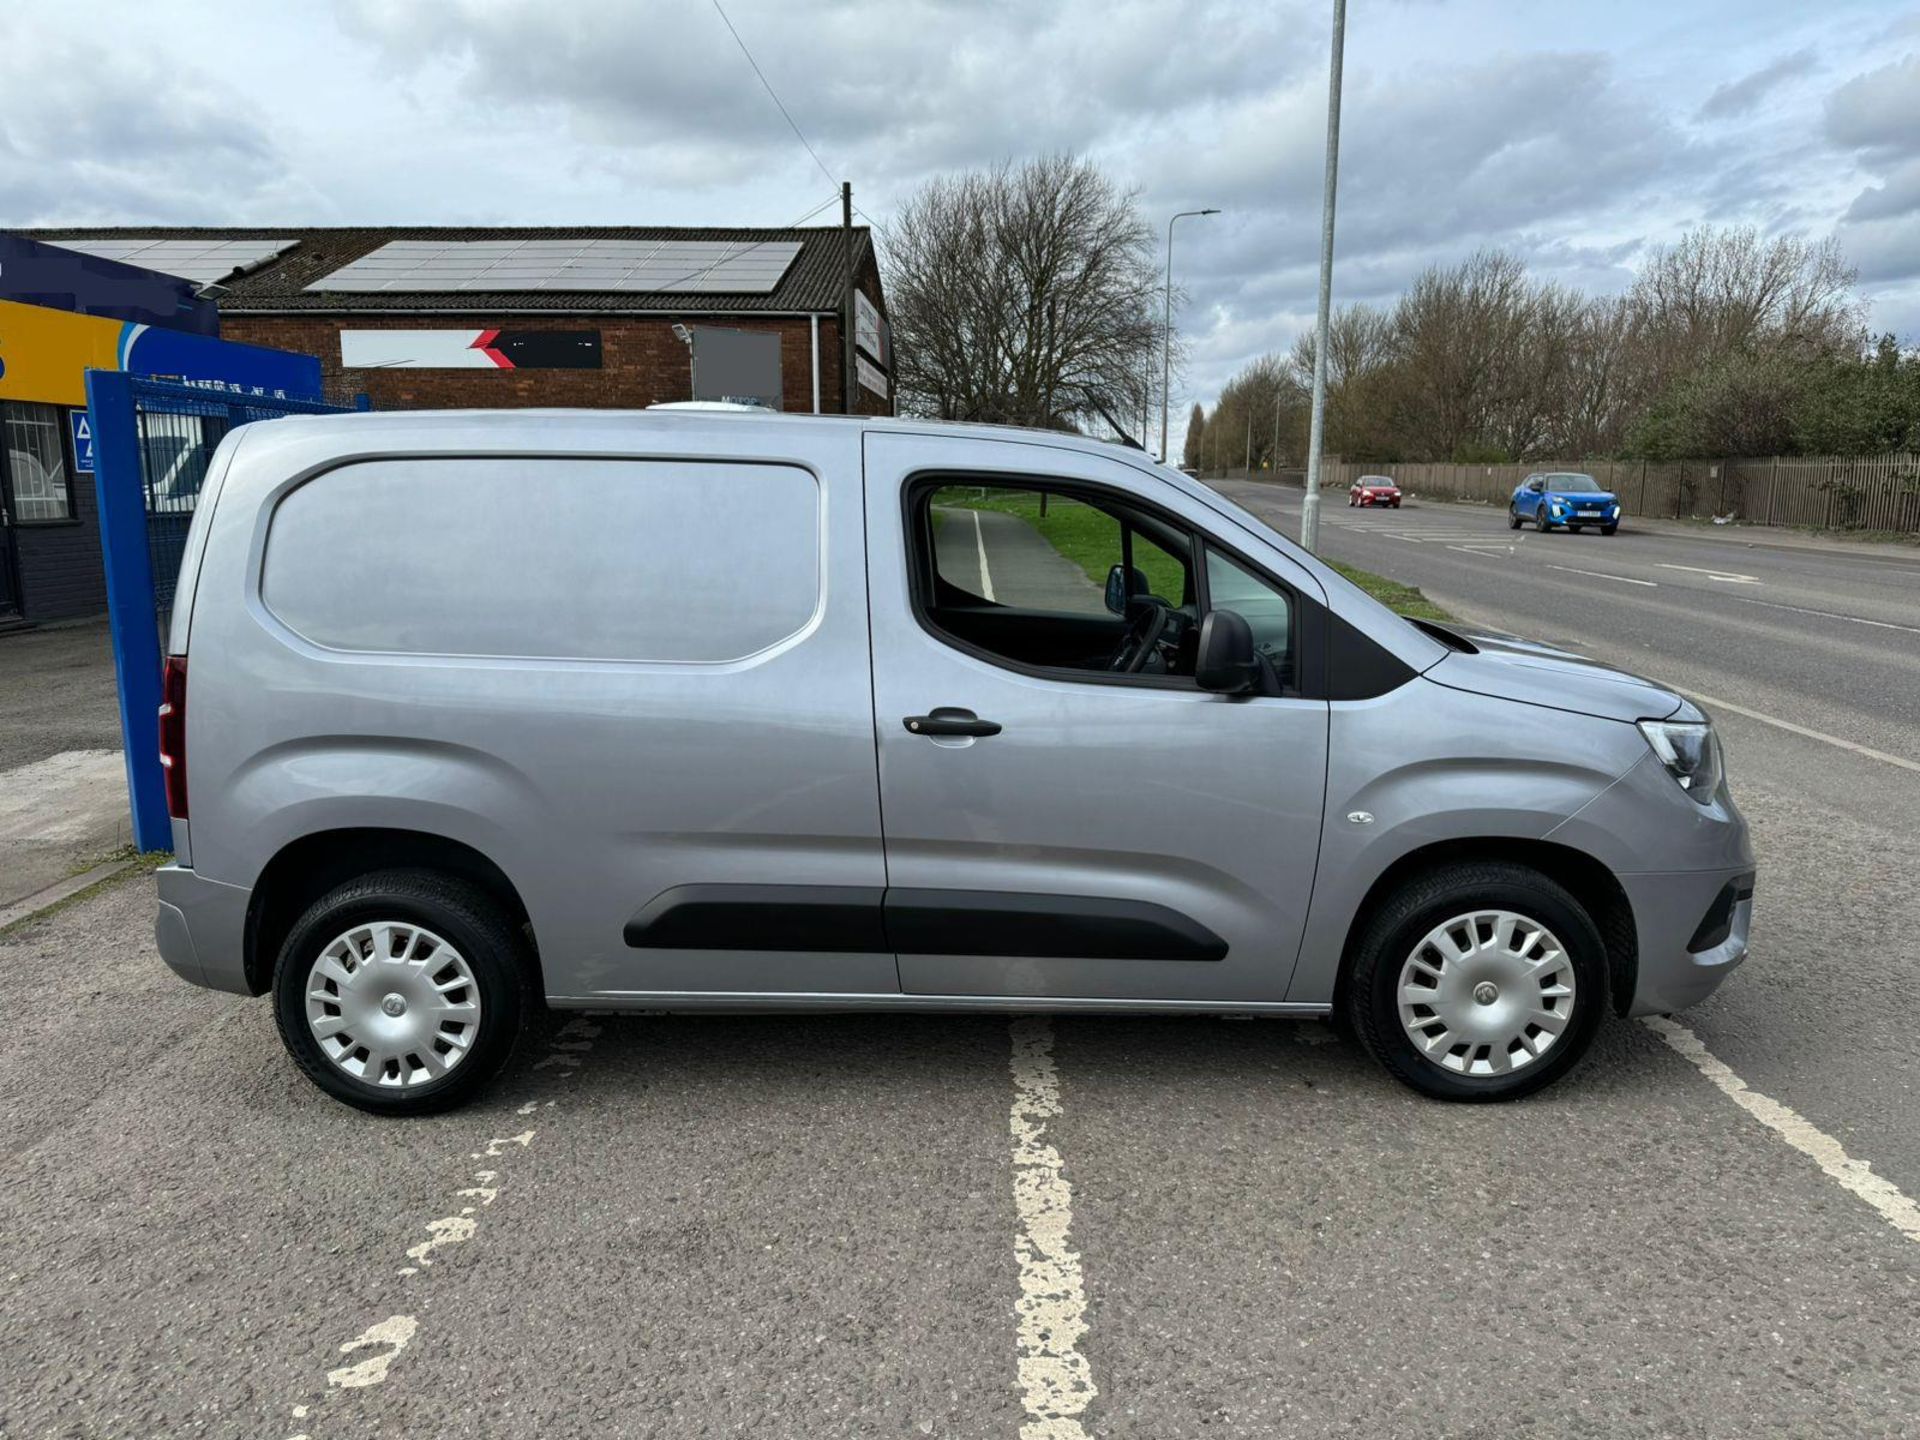 2020 20 VAUXHALL COMBO SPORTIVE PANEL VAN - 51K MILES - PLY LINED - AIR CON. - Image 8 of 11